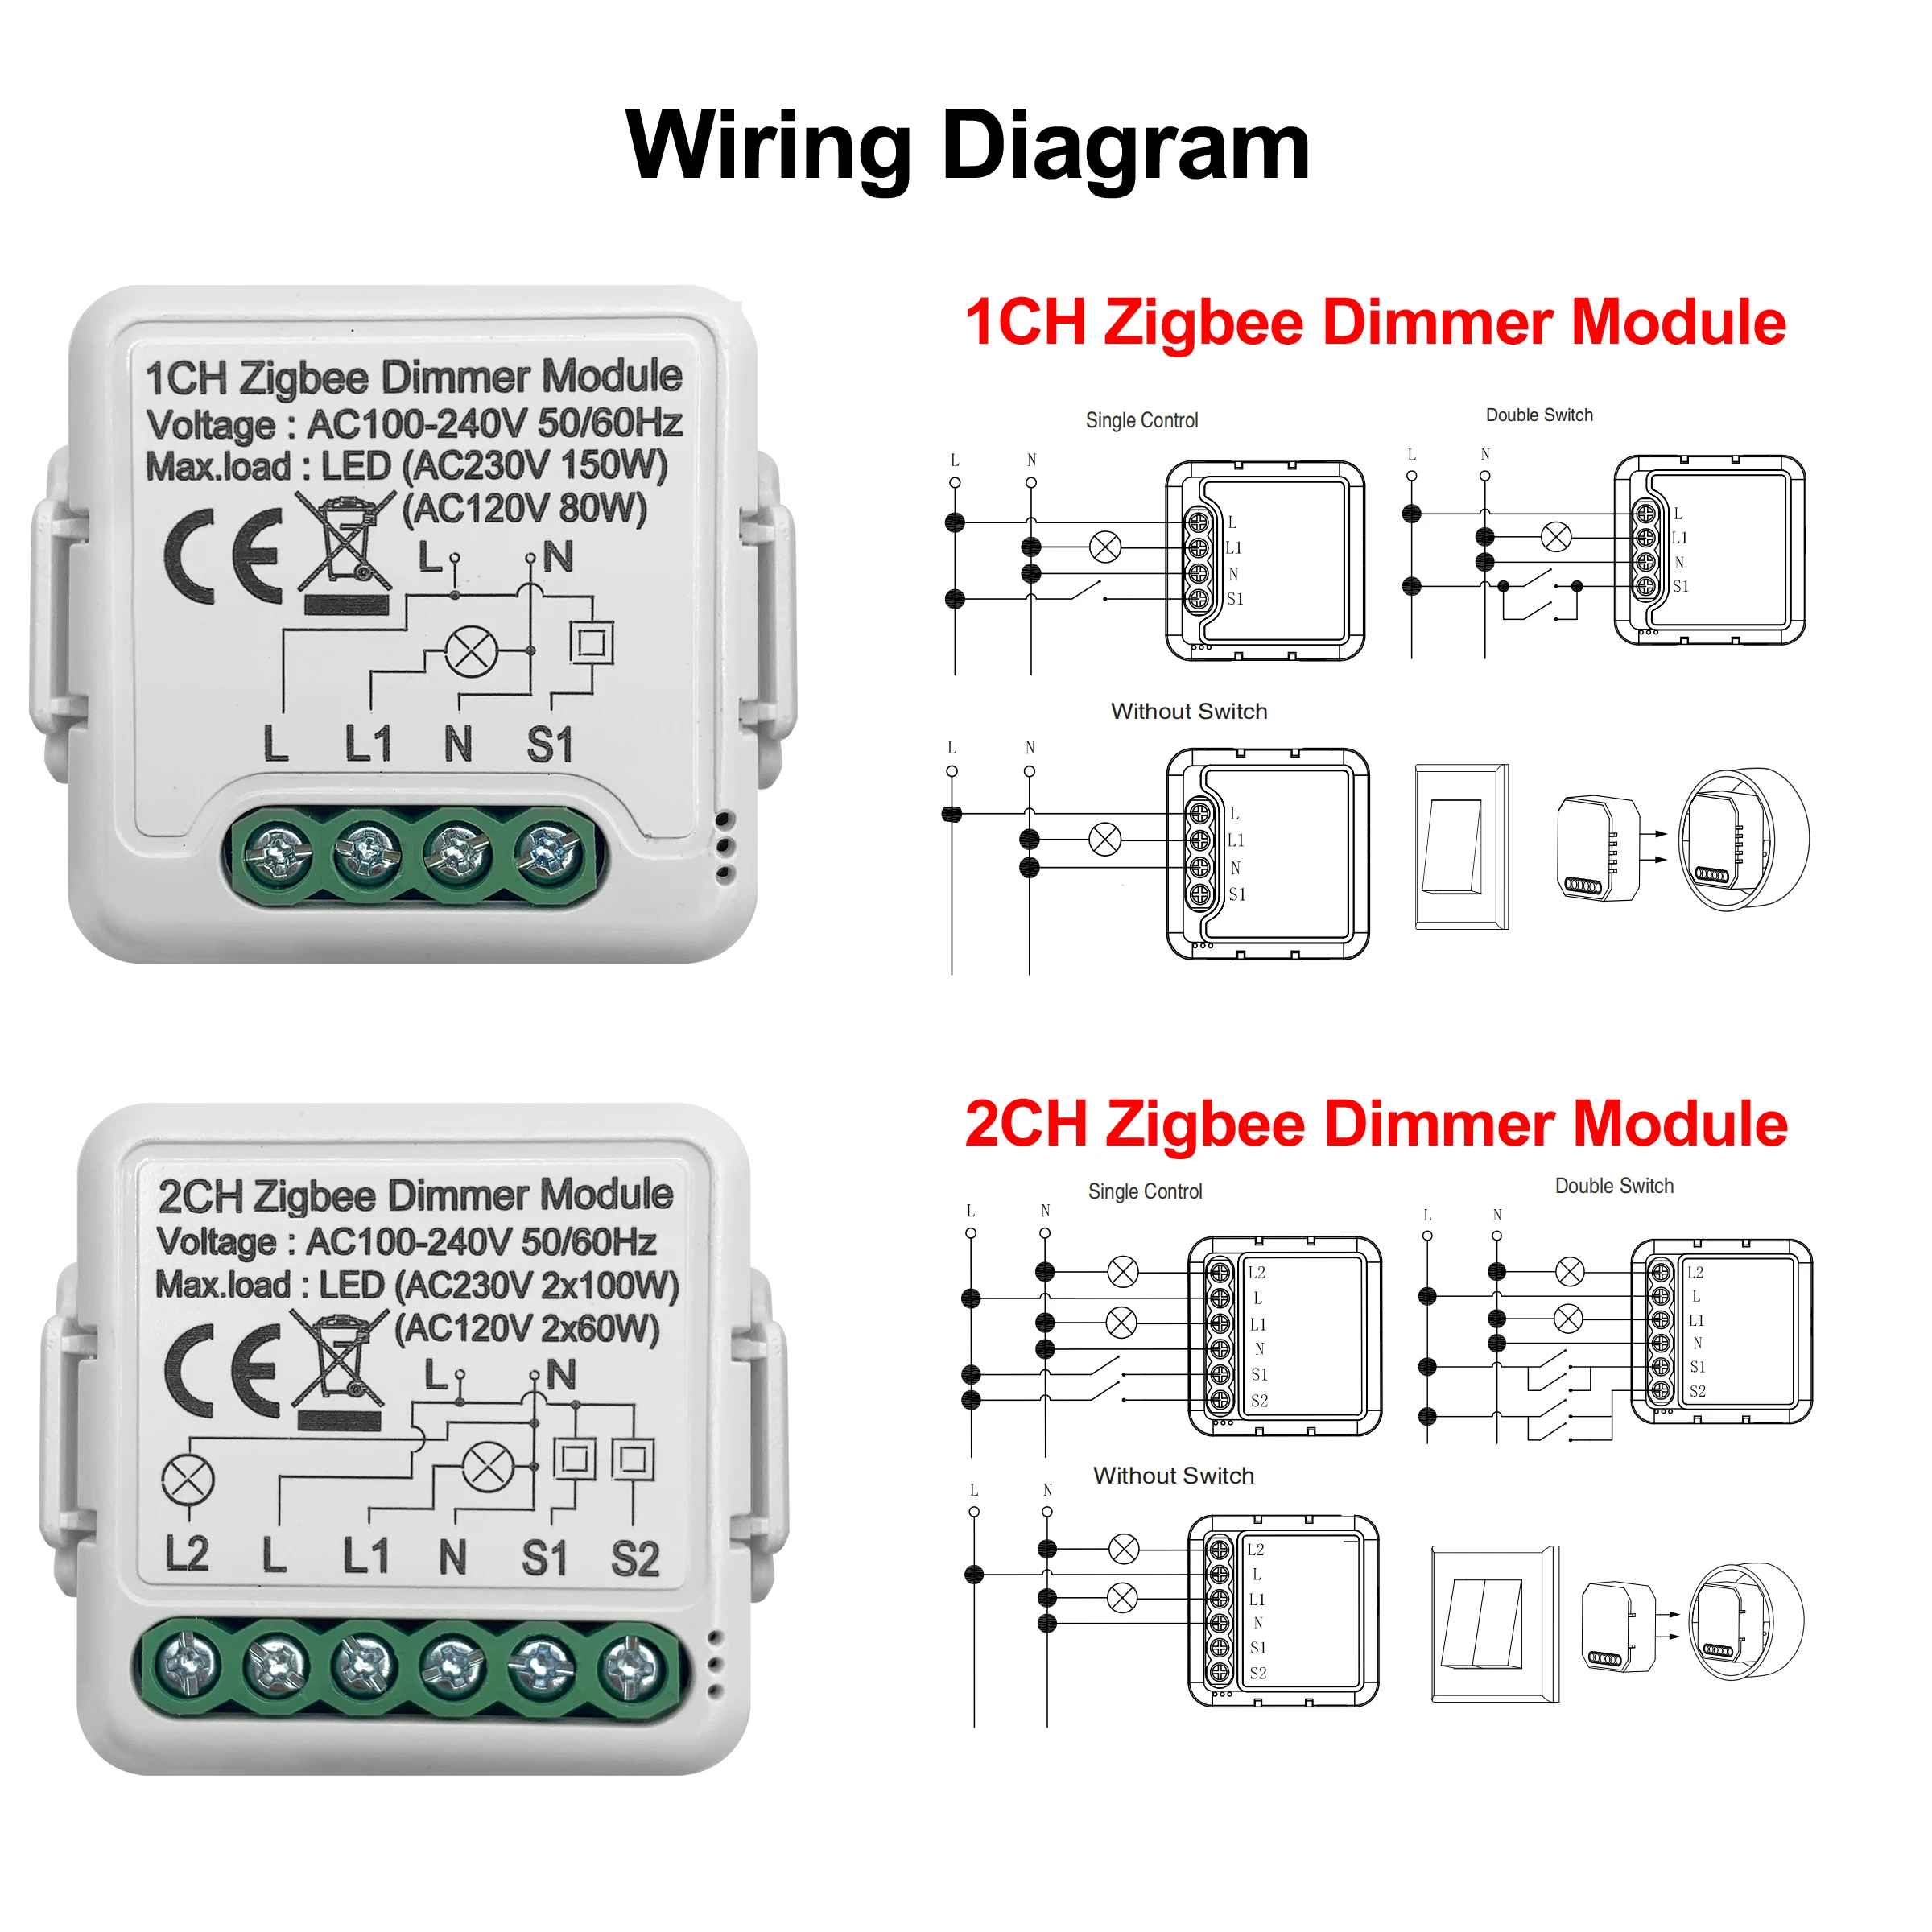 GIRIER Tuya ZigBee 3.0 Smart Dimmer Switch Module, Supports 2 Way Control Dimmable Light Switch, Work with Alexa Google Home